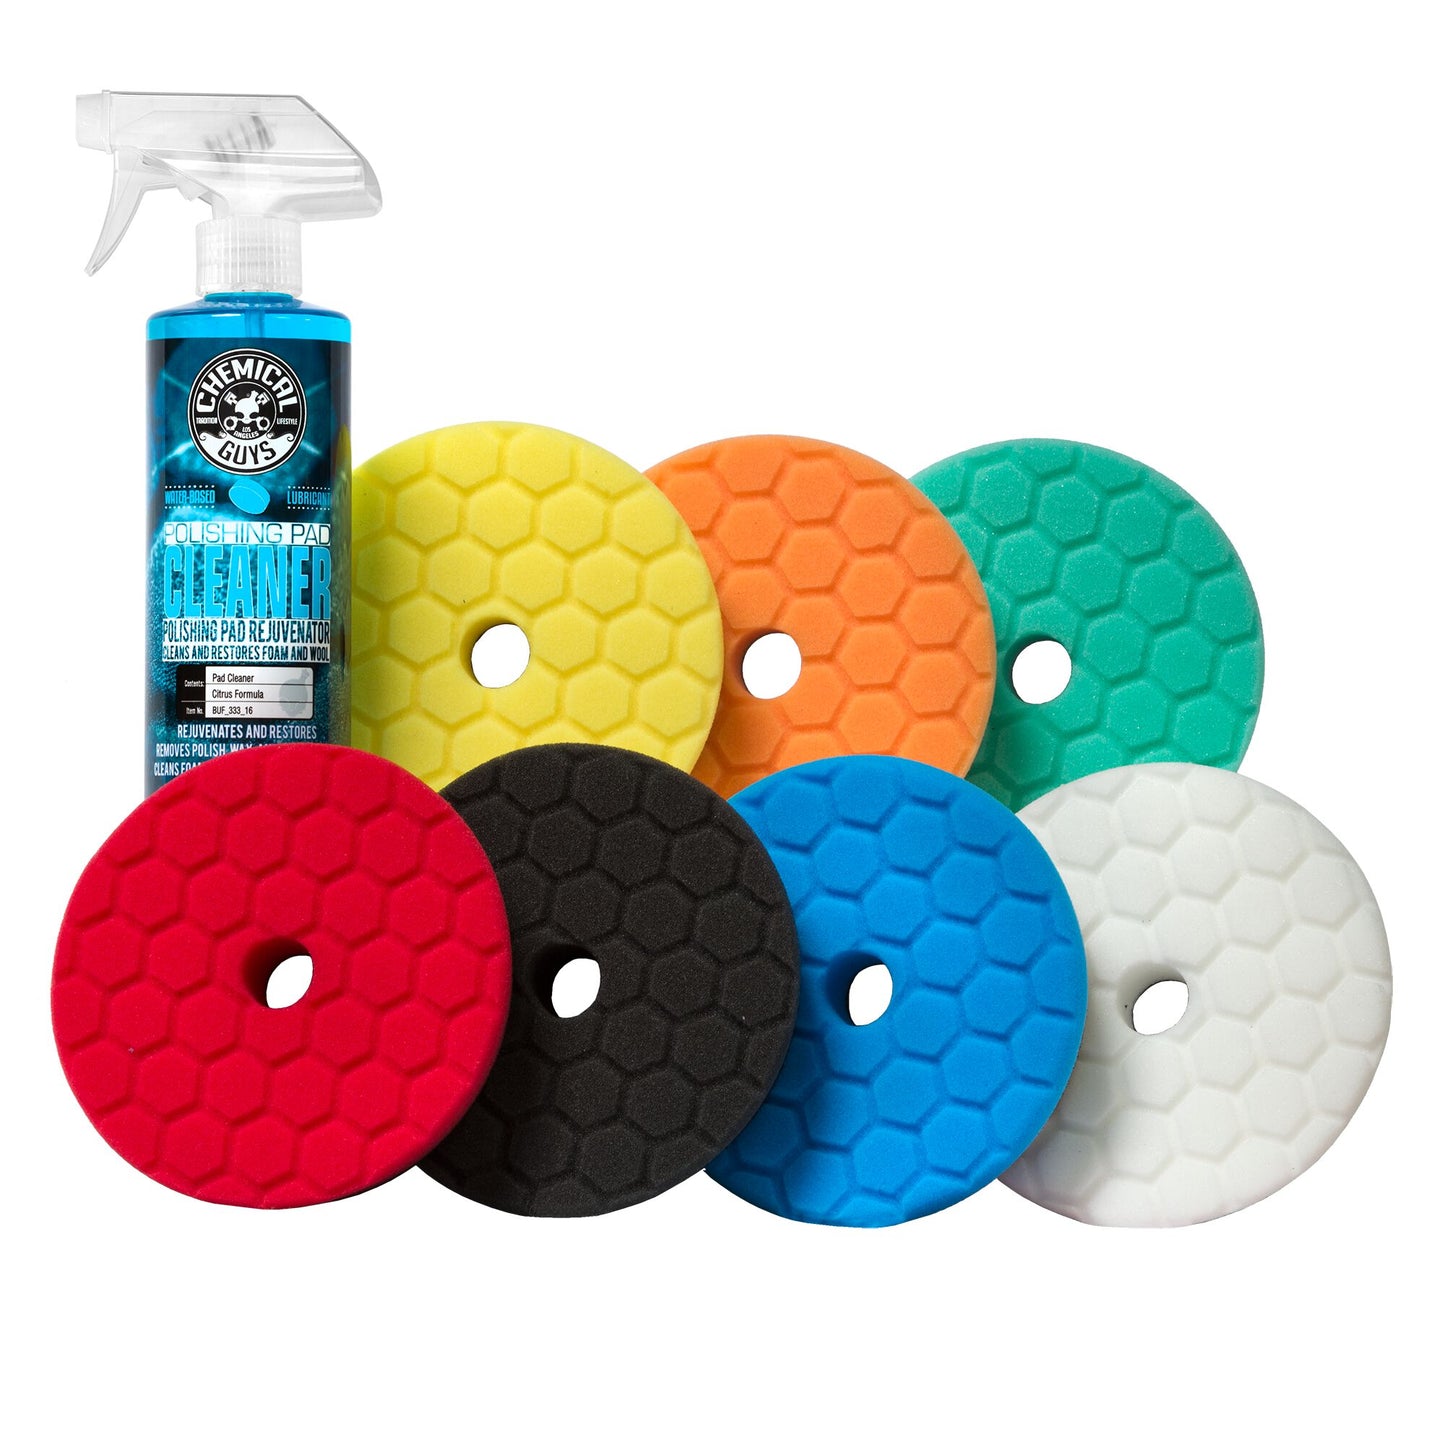 Hex-Logic Quantum 5.5" Best of the Best Buffing Pads Kit (8 Items)